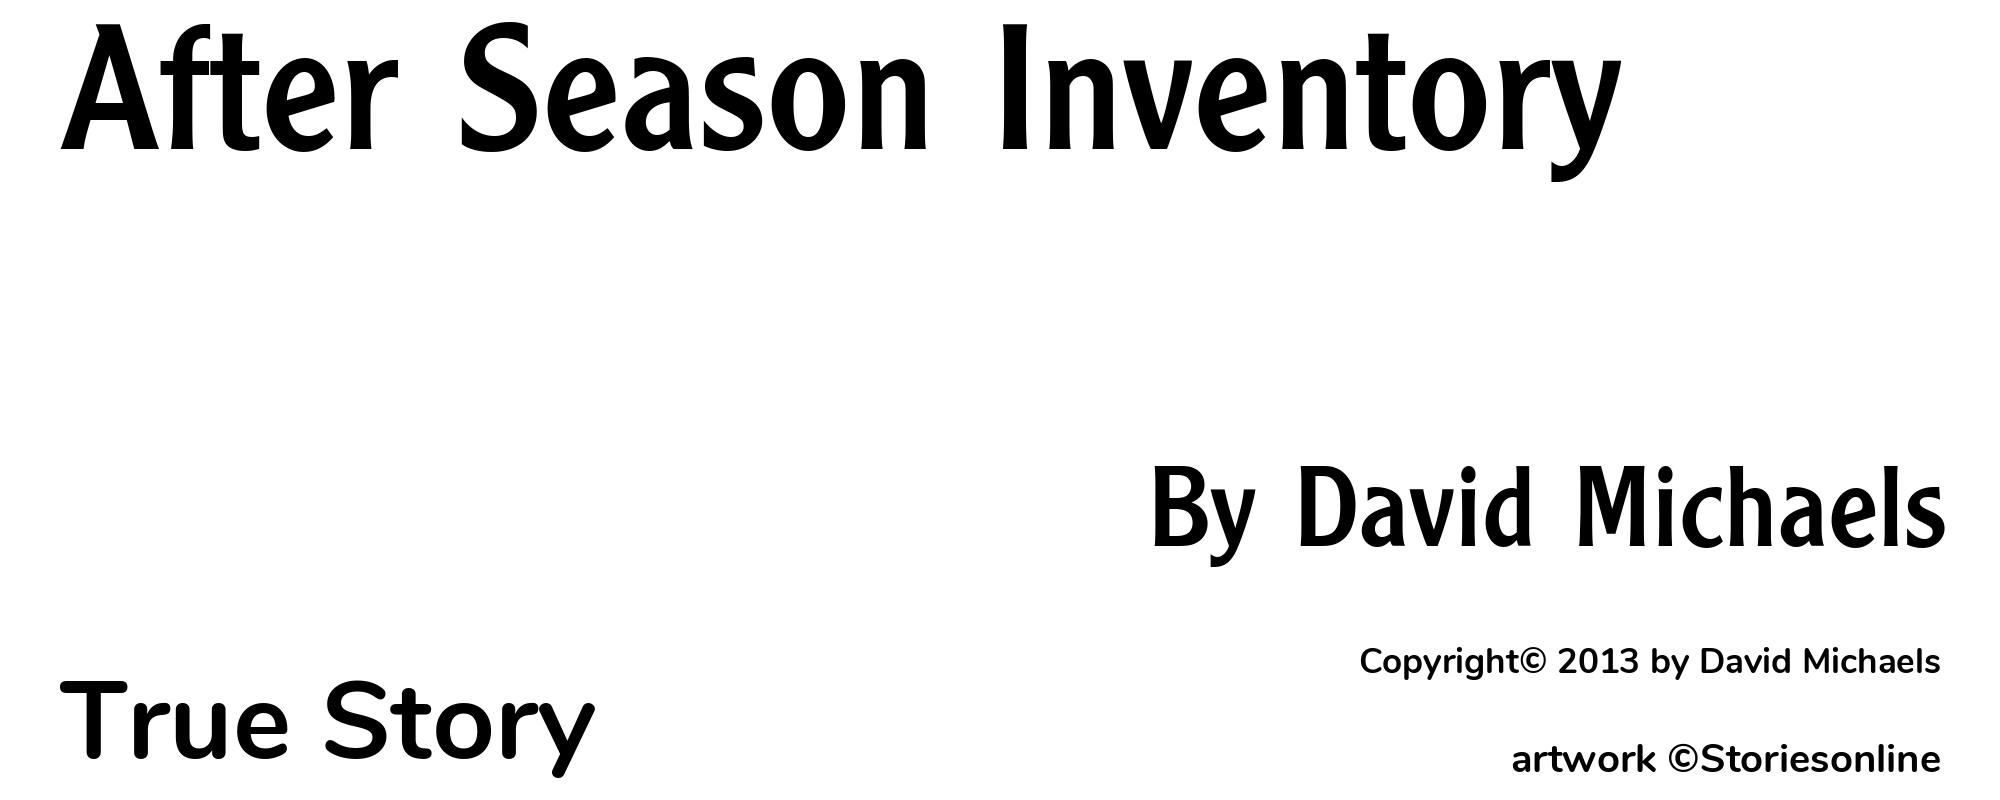 After Season Inventory - Cover